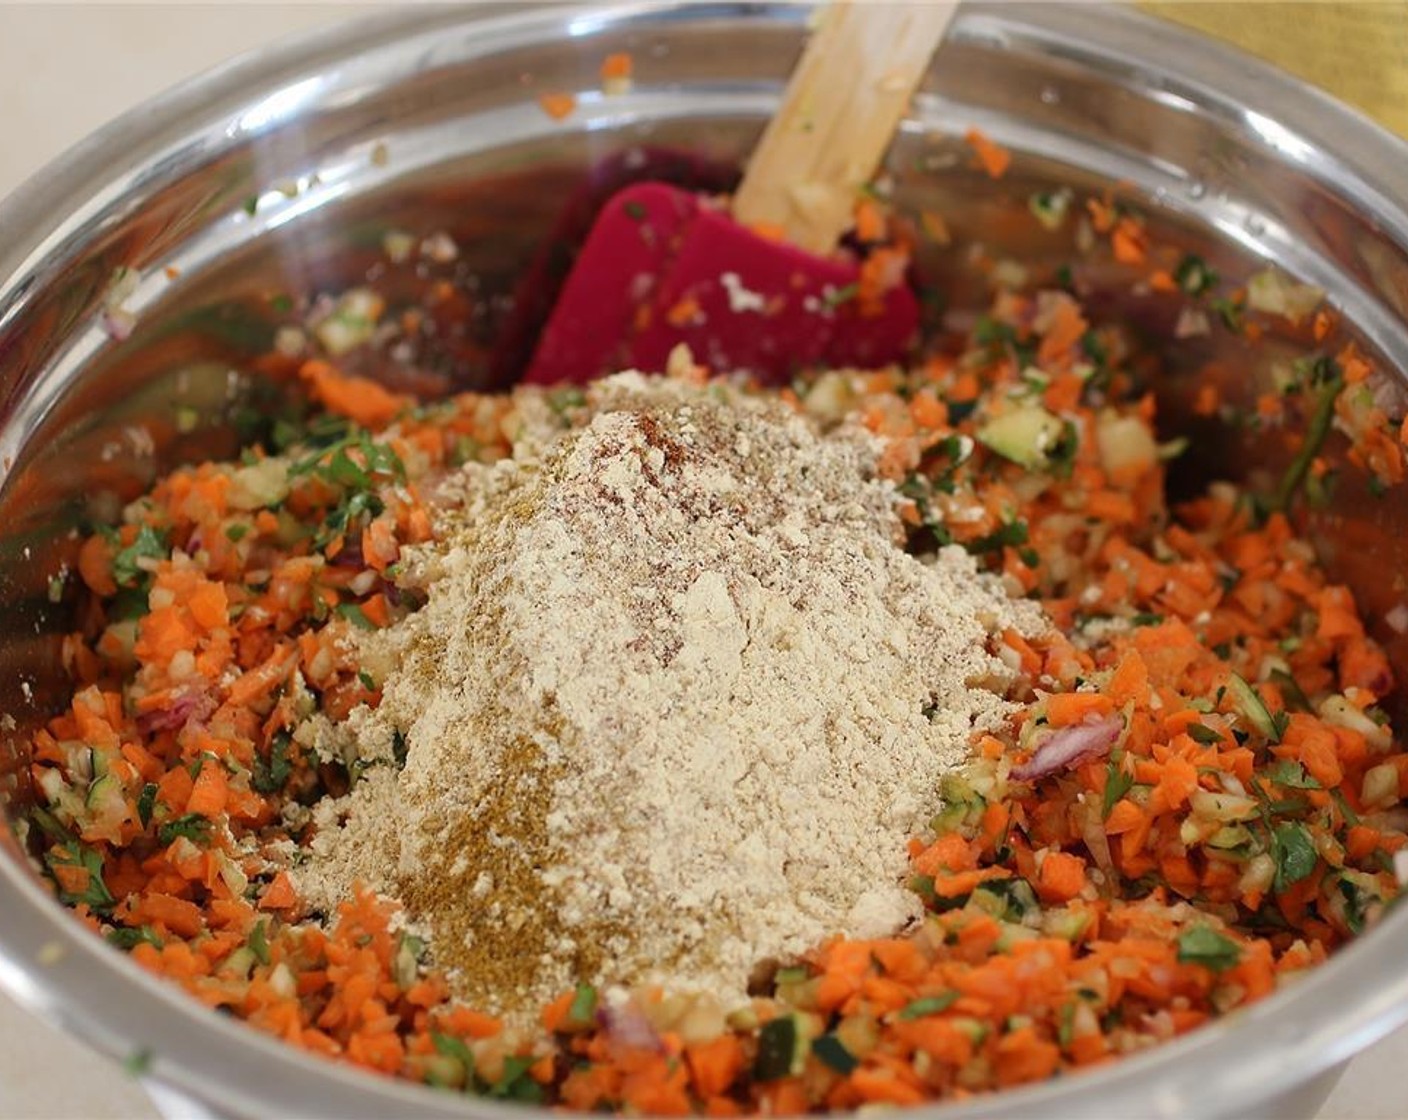 step 5 Add the zucchini to the carrots and other veggies and then top with the Chili Powder (1/2 Tbsp), Ground Cumin (1/2 Tbsp), Ground Coriander (1/2 Tbsp), and Curry Powder (1/2 Tbsp) plus an additional teaspoon. Stir with a wooden spoon or spatula to evenly mix.